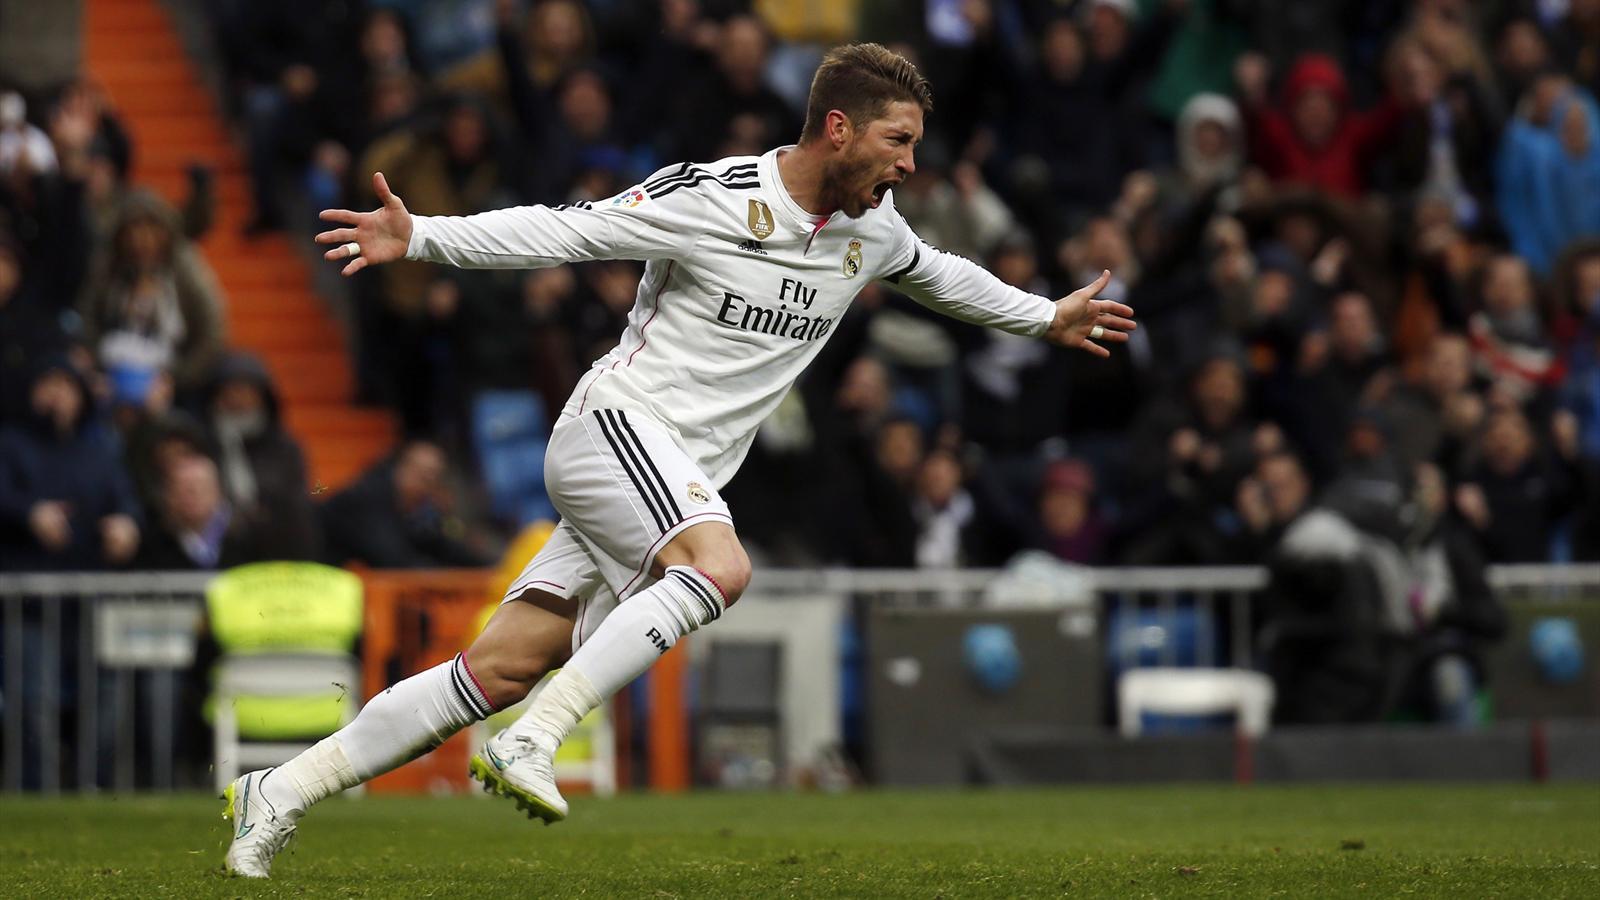 Sergio Ramos dispels transfer rumors and commits his future to